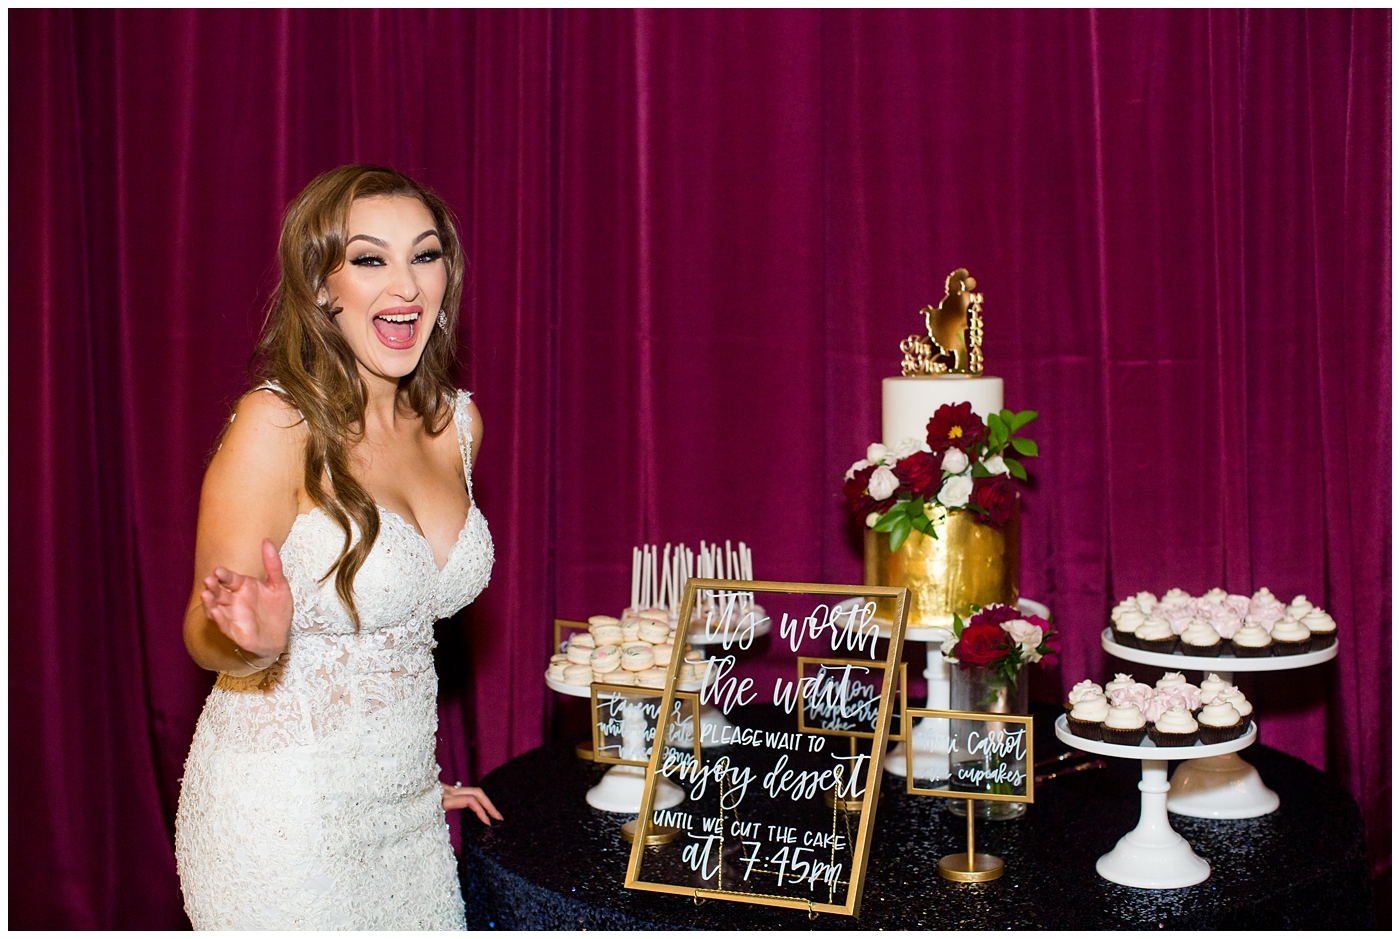 bride in morilee wedding dress with dessert table at wedding